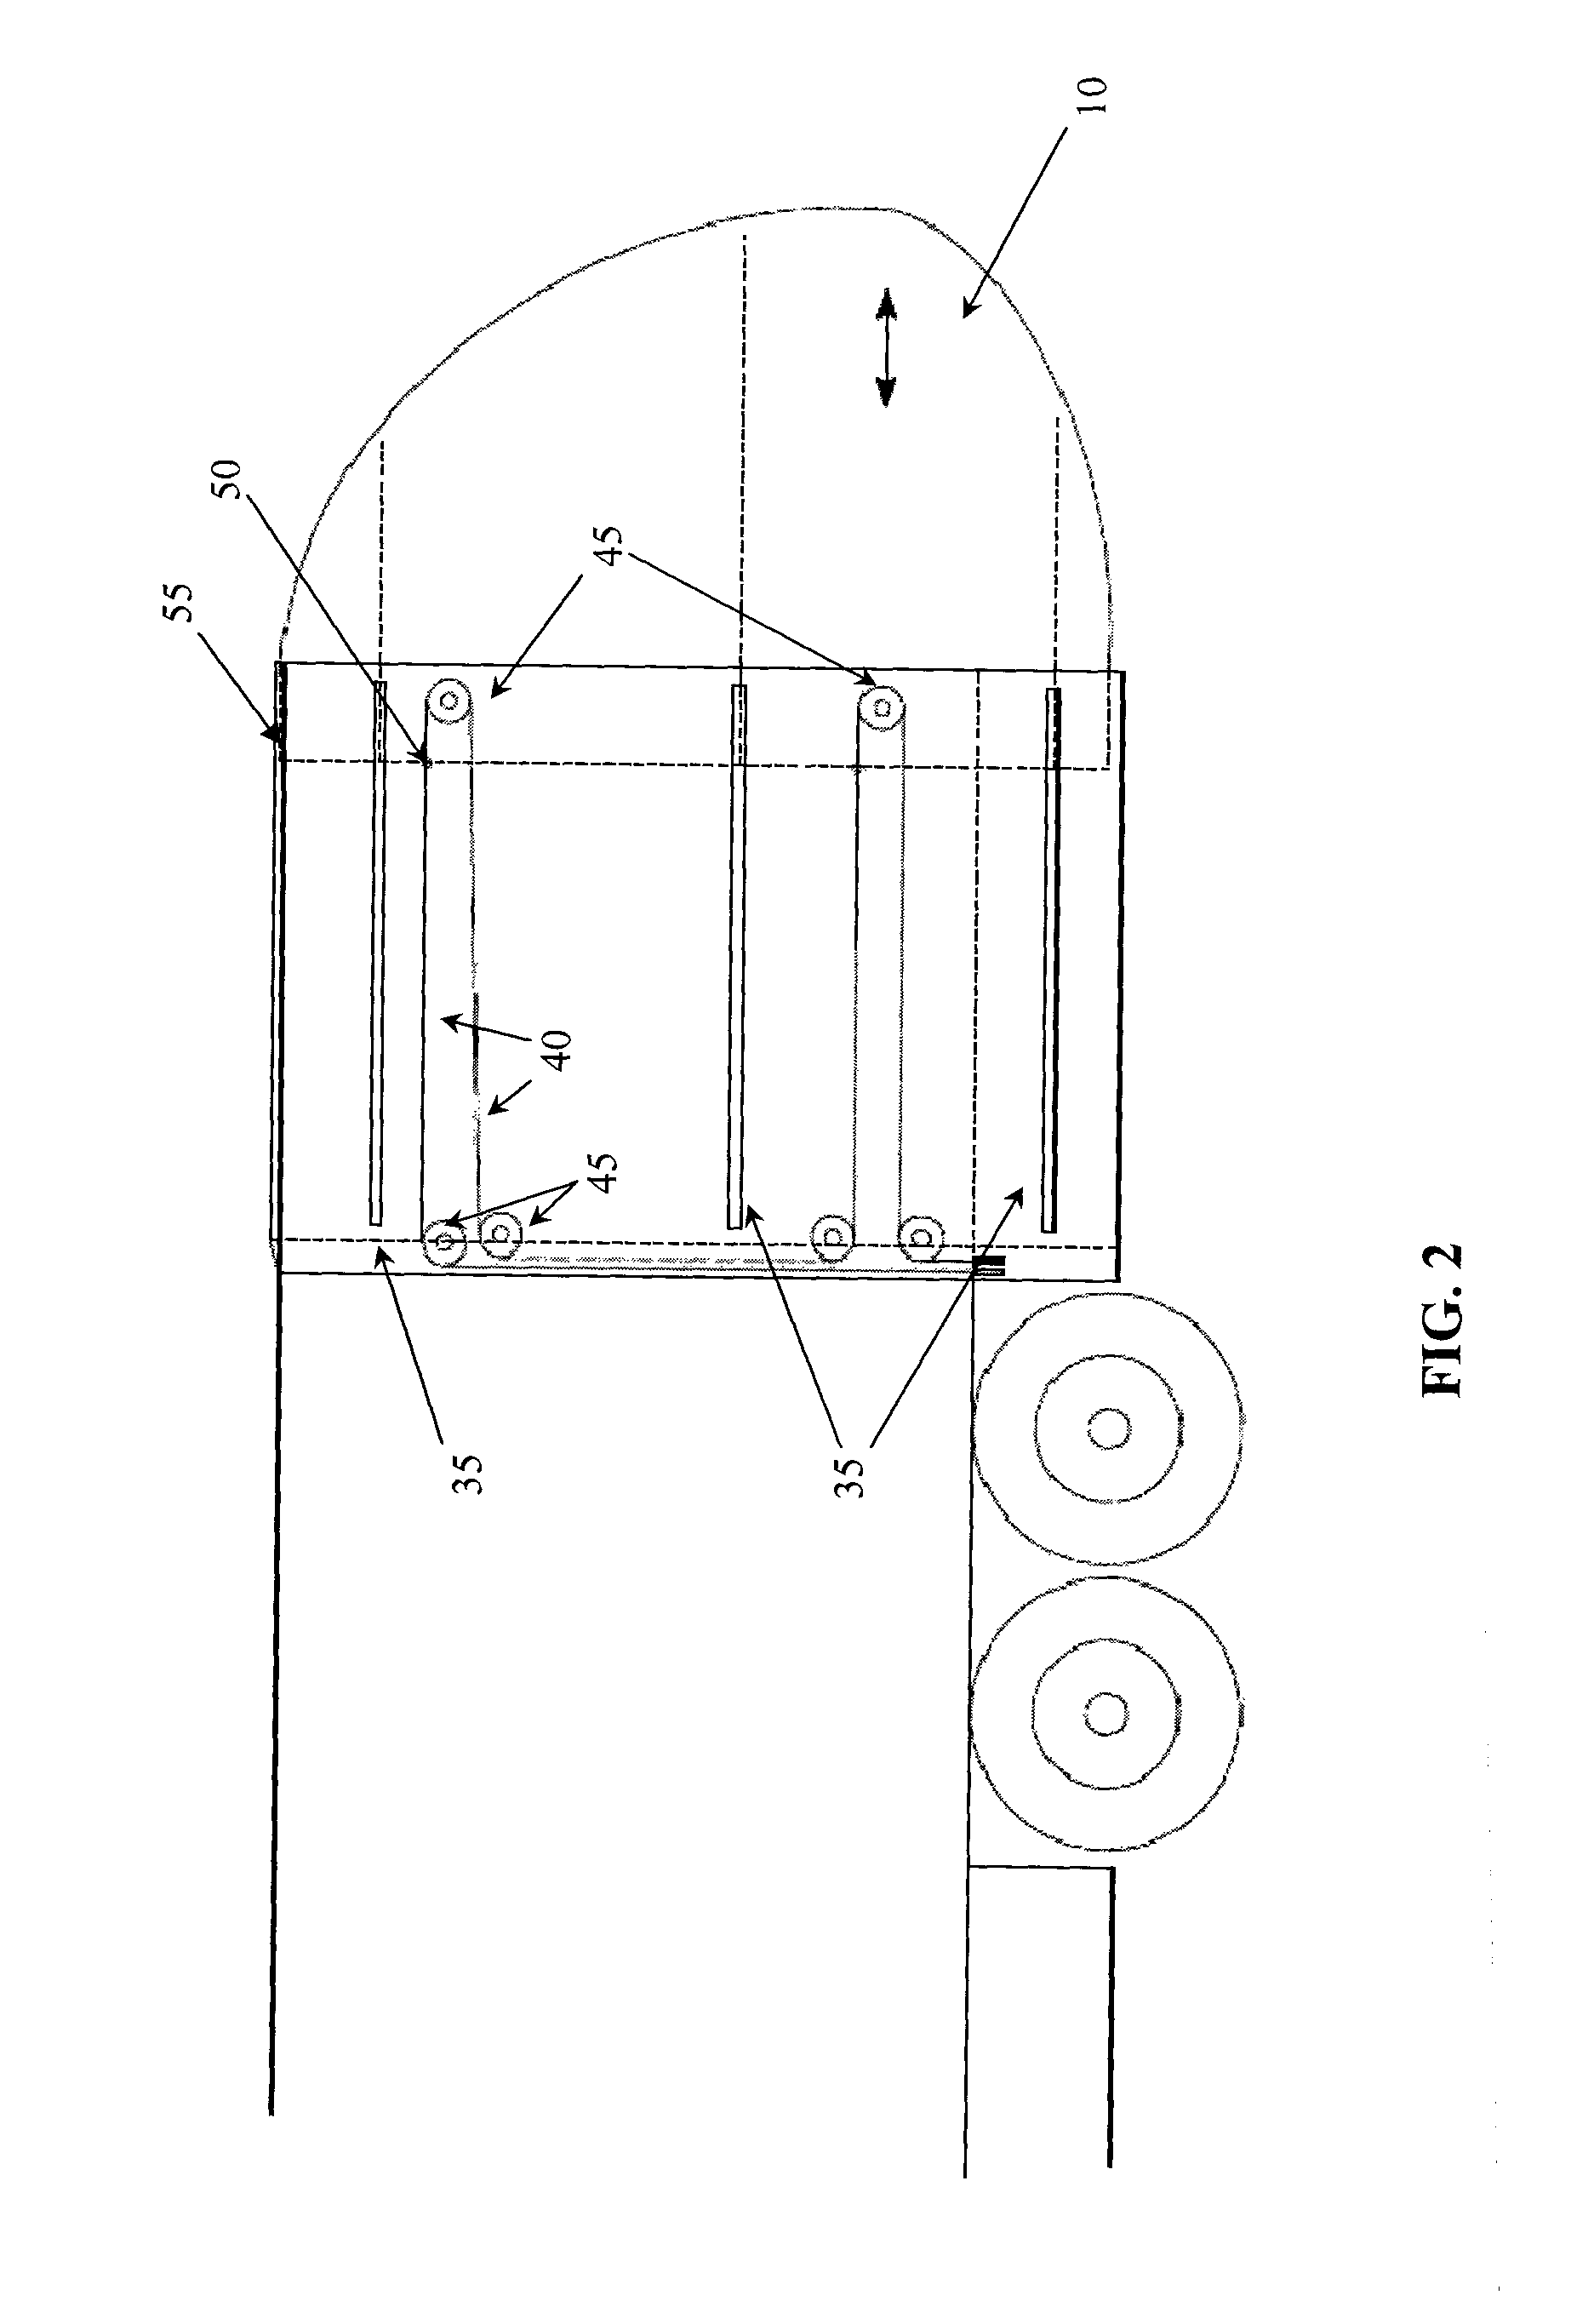 Drag-reducing device